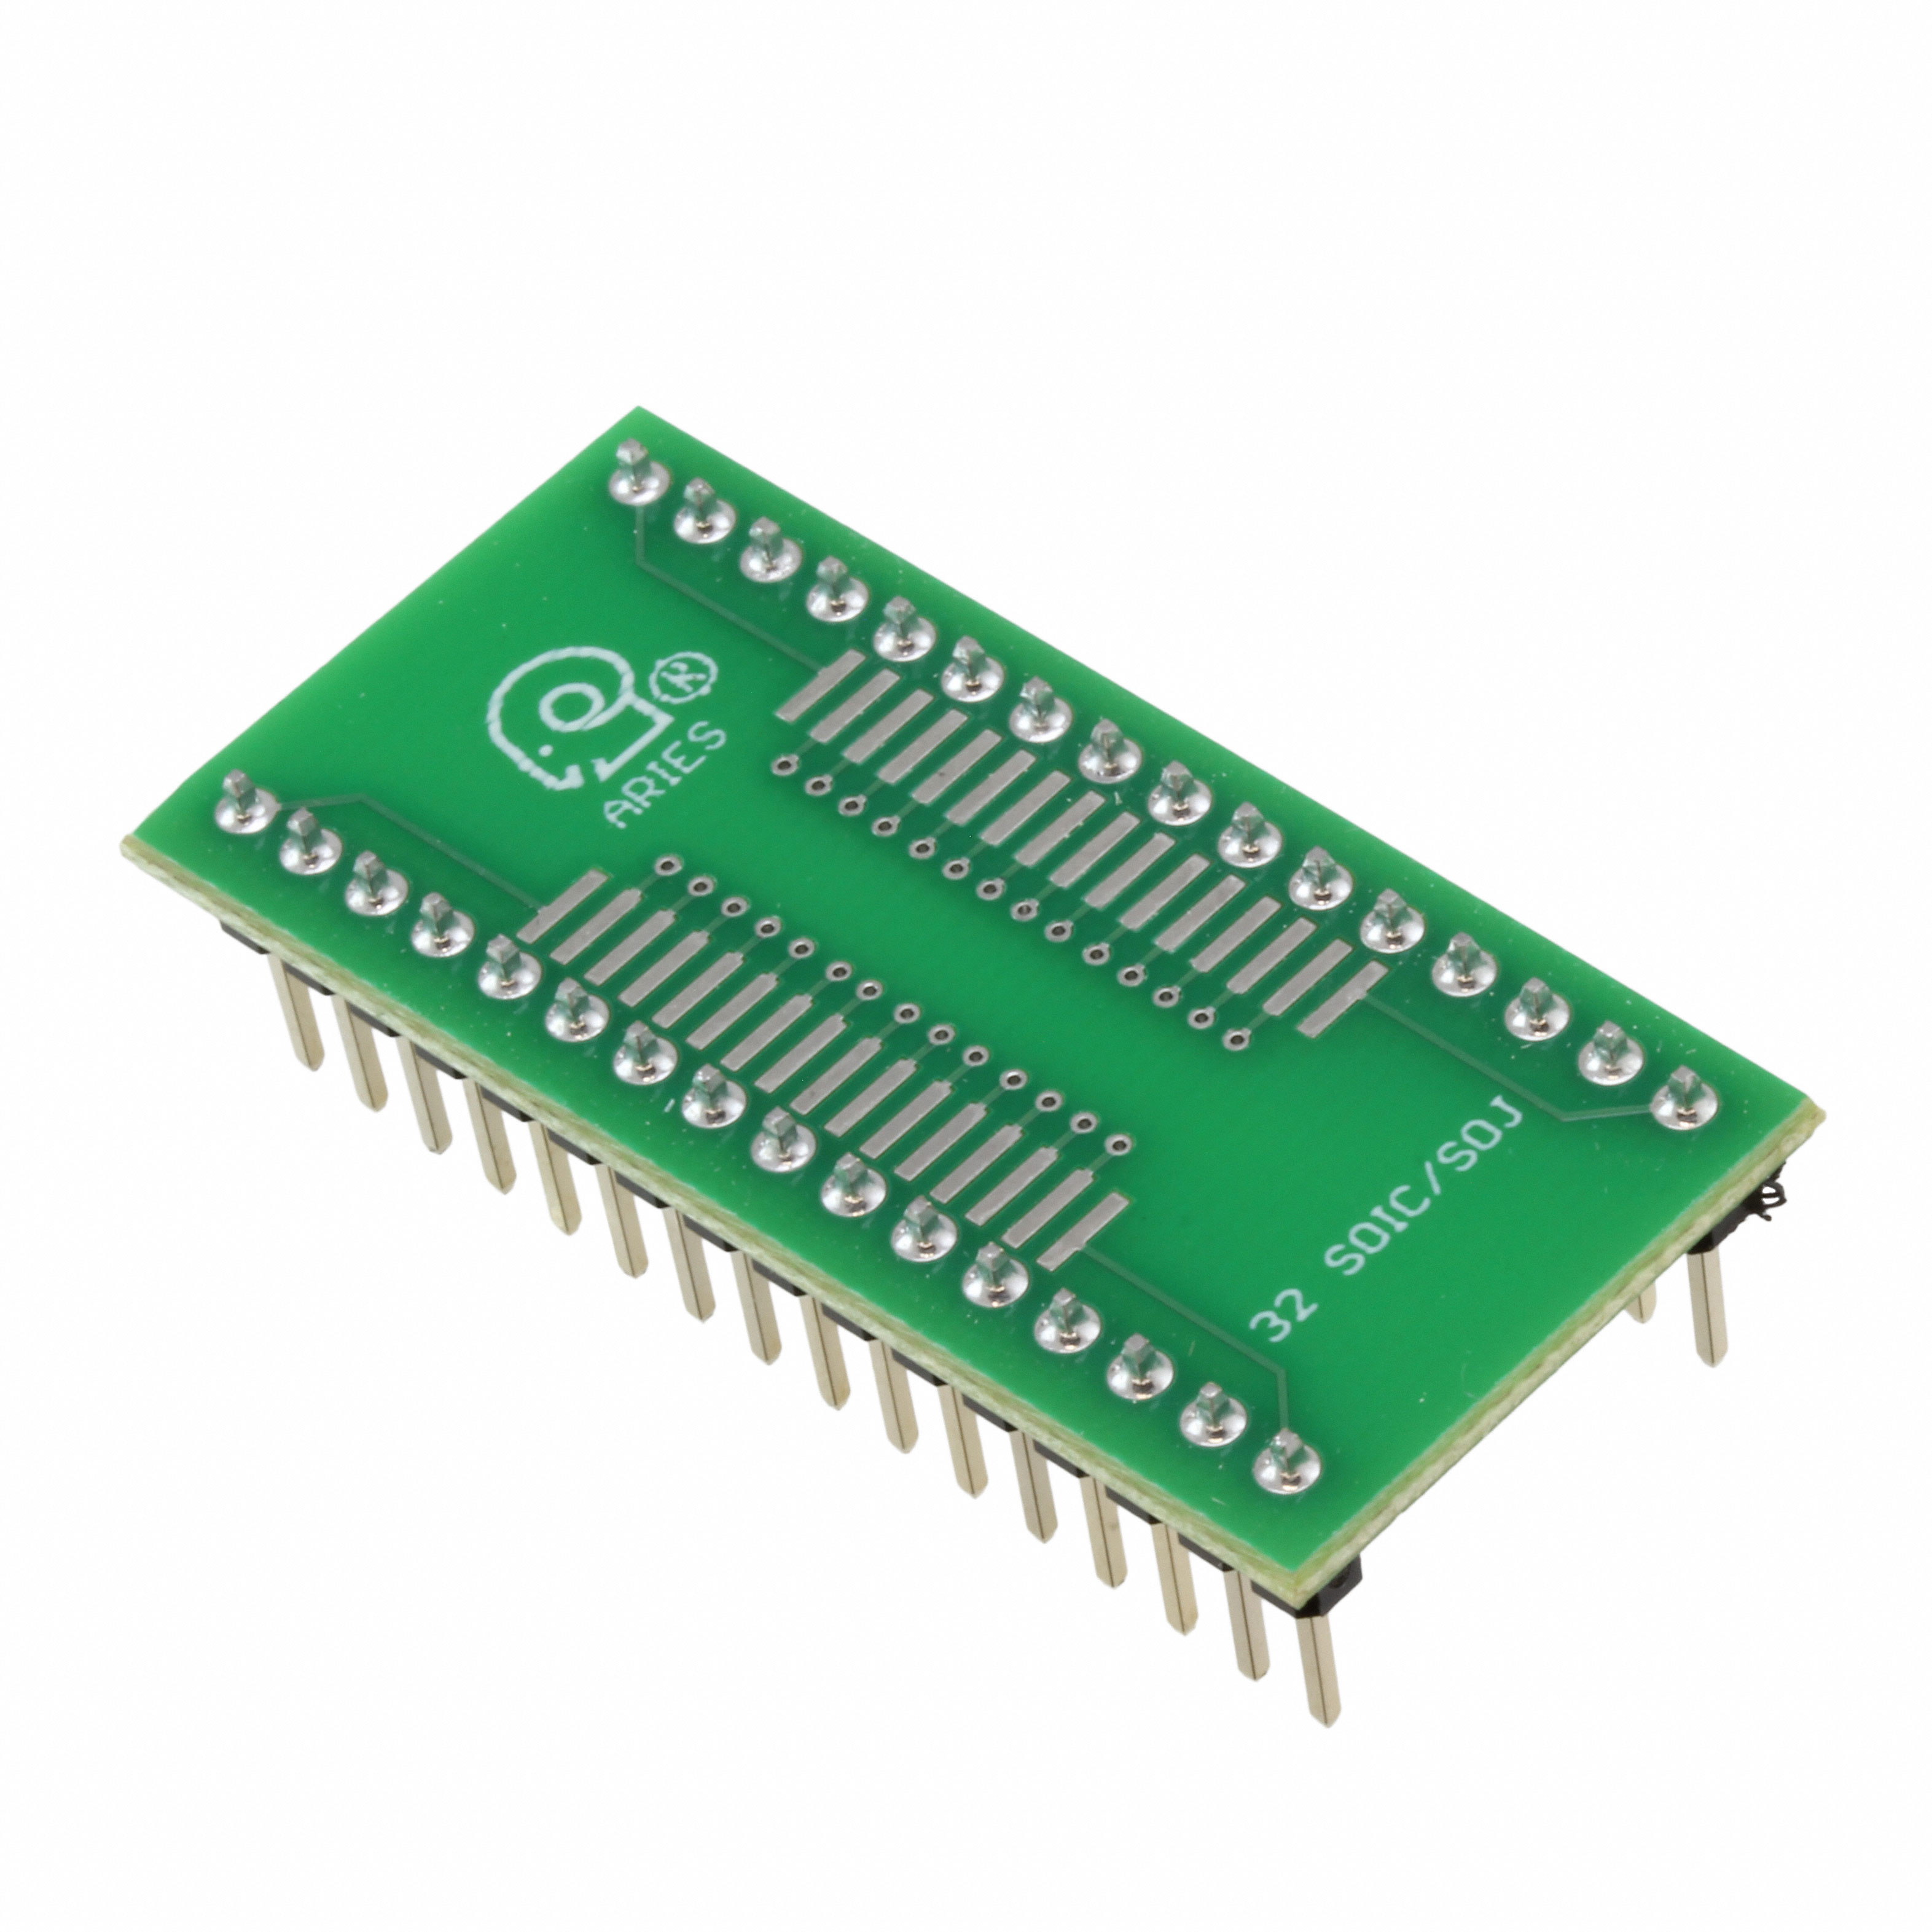 【LCQT-SOIC32】SOCKET ADAPTER SOIC TO 32DIP